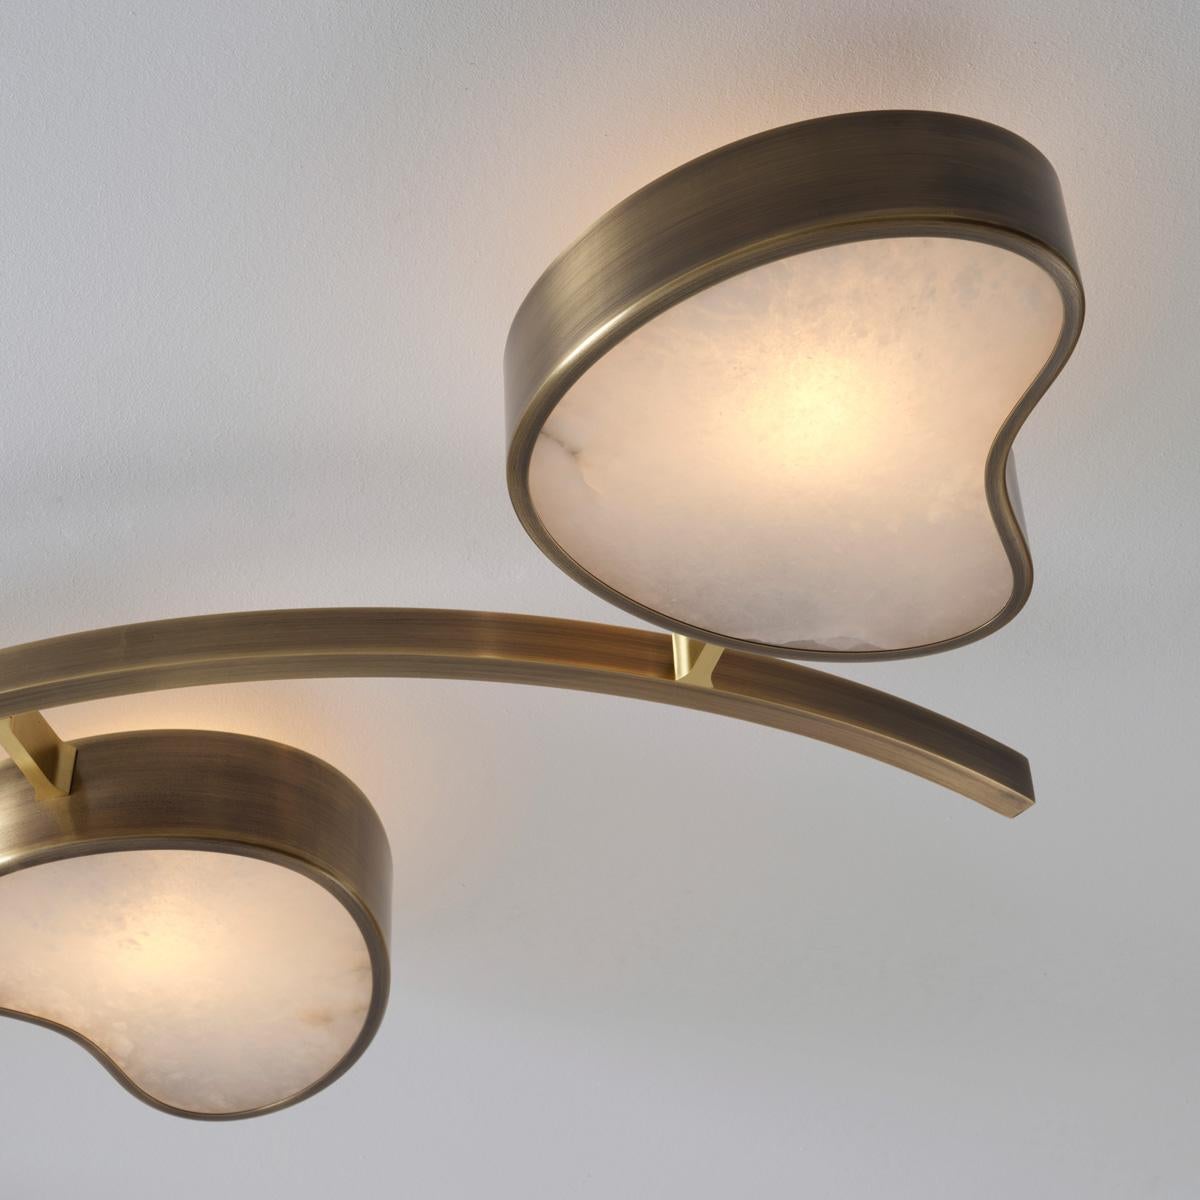 Contemporary Cuore N.6 Ceiling Light by Gaspare Asaro. Polished Brass Finish For Sale